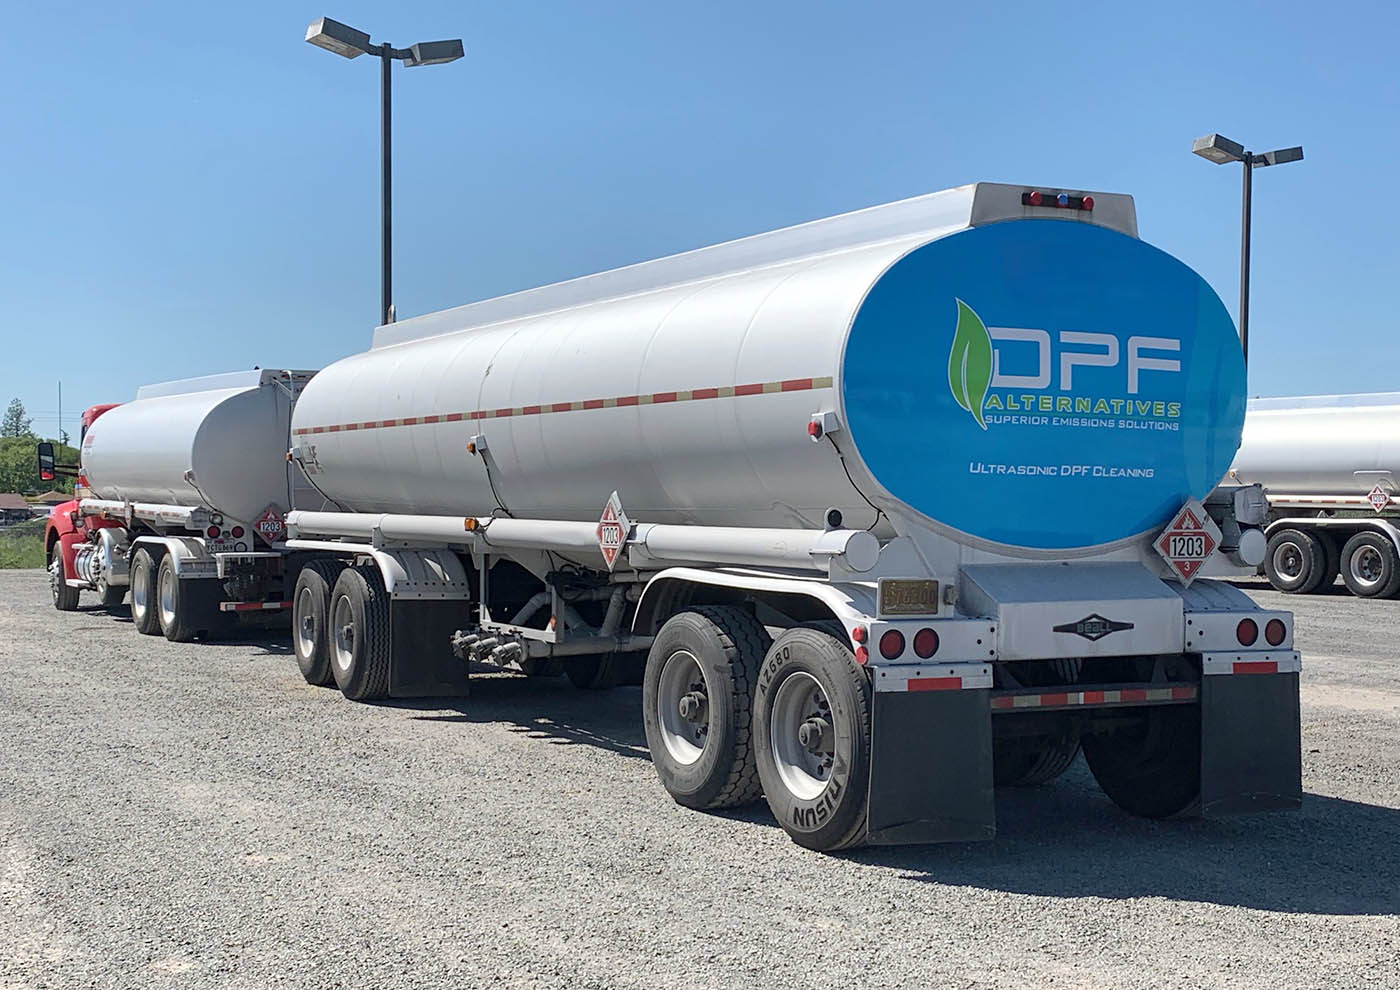 Back of a clean, large, reflective semi truck rig, contact DPF Alternatives for a DPF cleaning in Roanoke.